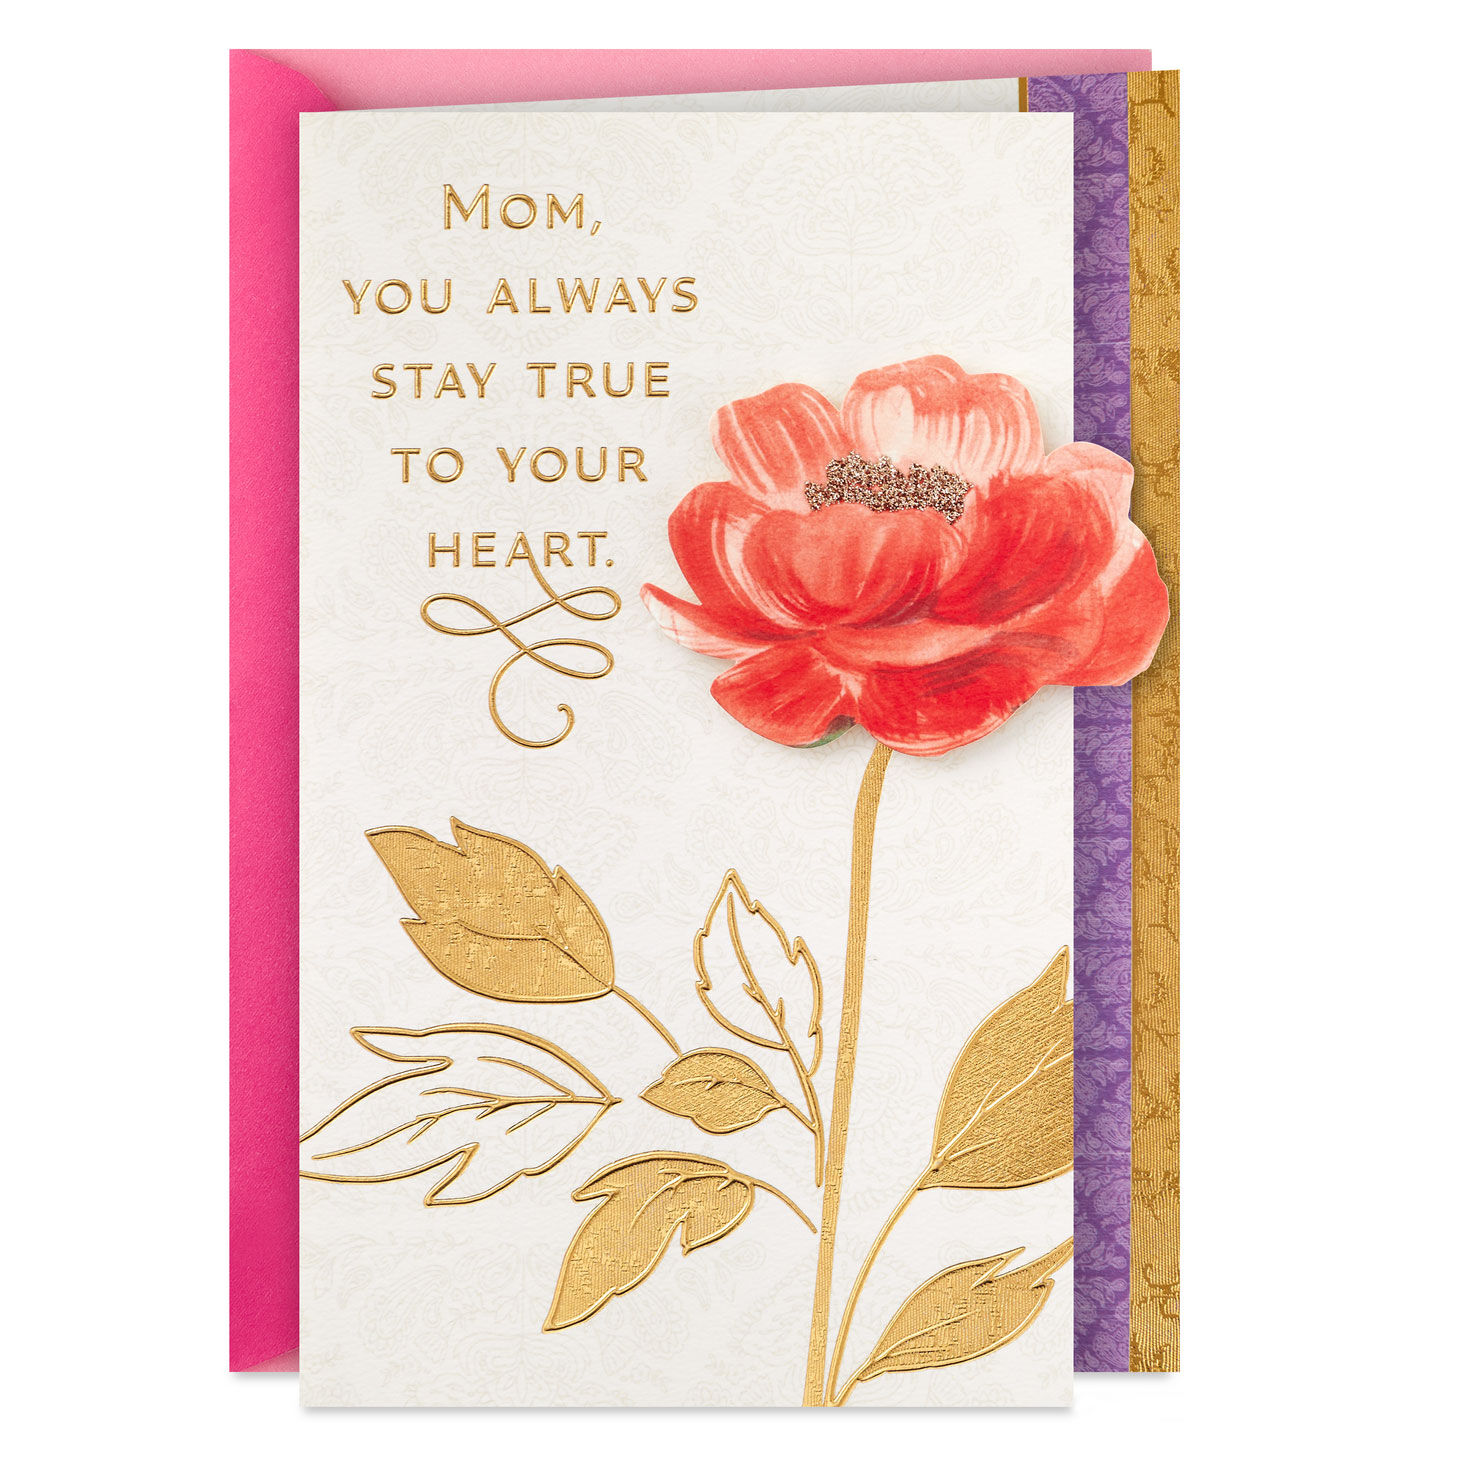 You Always Stay True to Your Heart Mother's Day Card for Mom for only USD 5.99 | Hallmark